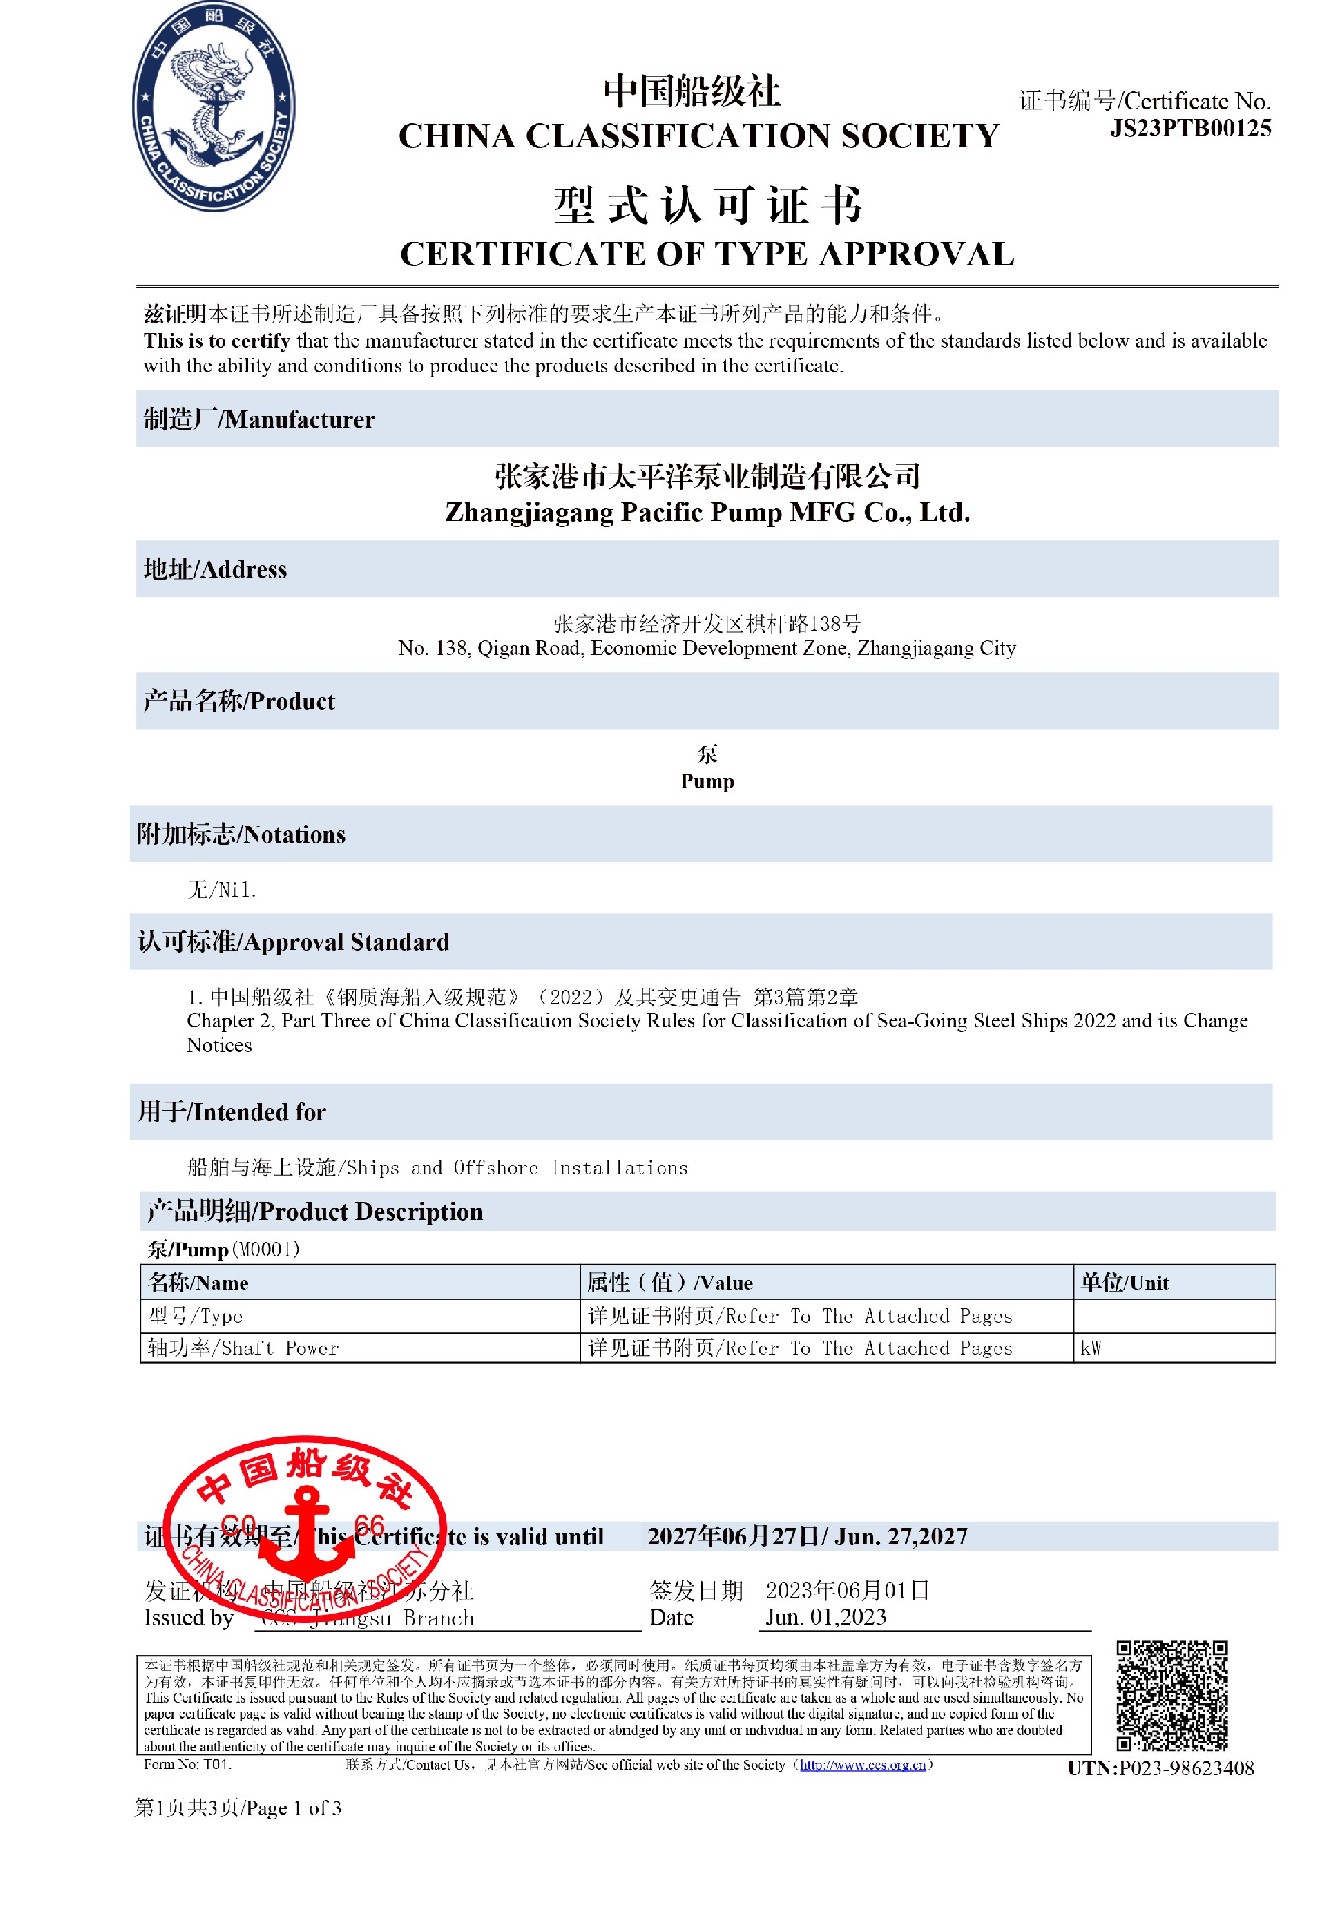 China classification society certificate of type approval